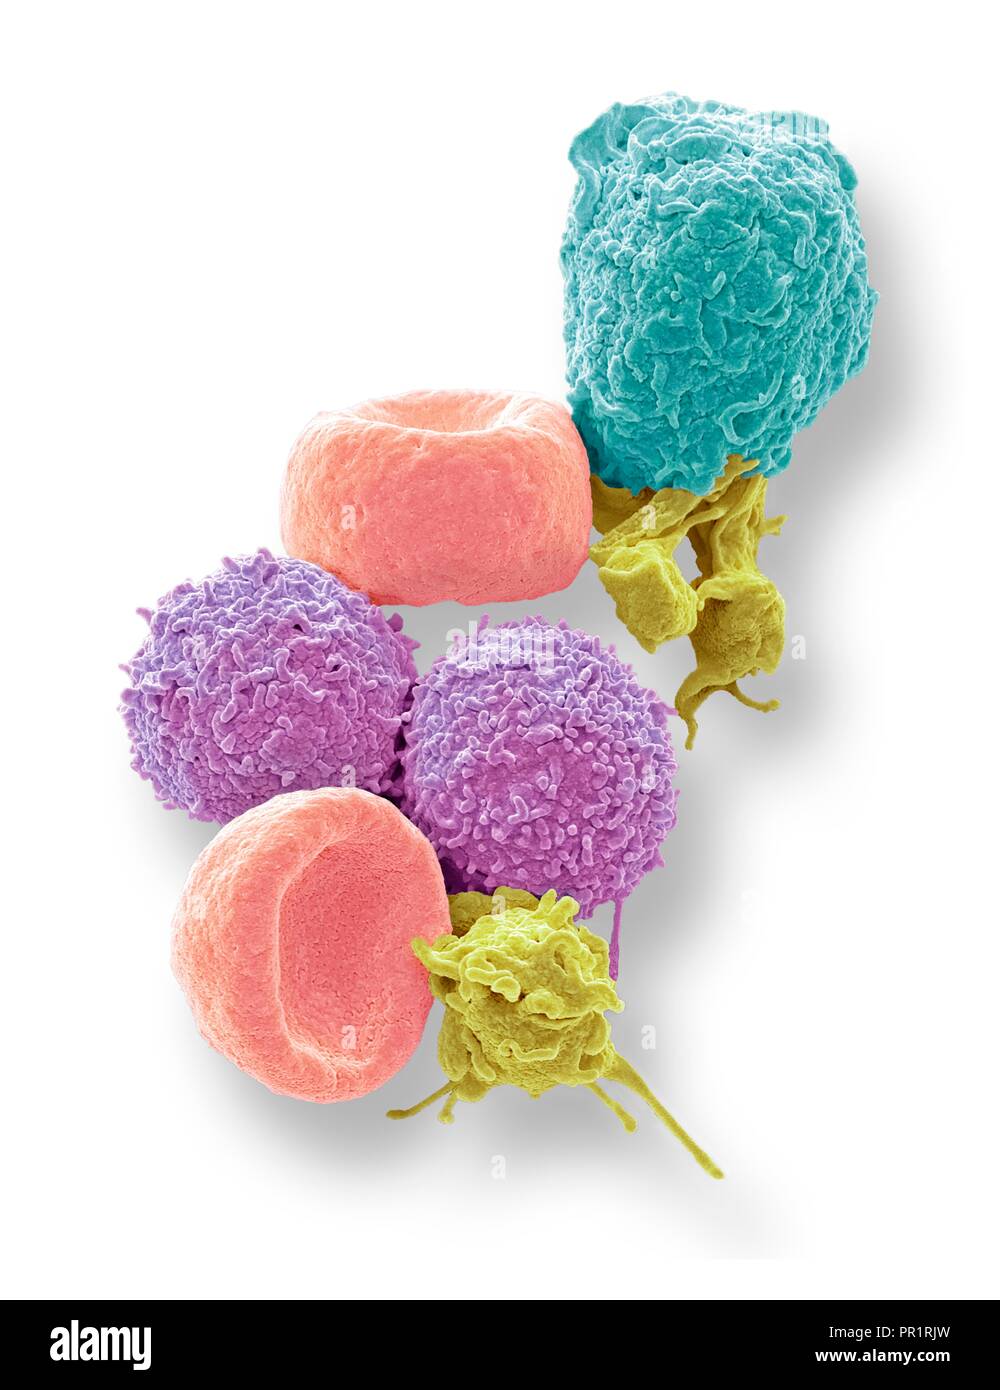 Blood cells. Coloured scanning electron micrograph (SEM) of human red blood cells (erythrocytes, red), white blood cells (leukocytes, pink and cyan), and platelets (thrombocytes, yellow). The disc-shaped, biconcave erythrocytes transport oxygen to the body's cells and remove carbon dioxide to the lungs. Leukocytes are part of the immune system, defending the body against infection by ingesting pathogens by phagocytosis or by producing antibodies. Magnification: x5000 when printed 10 centimetres high. Stock Photo